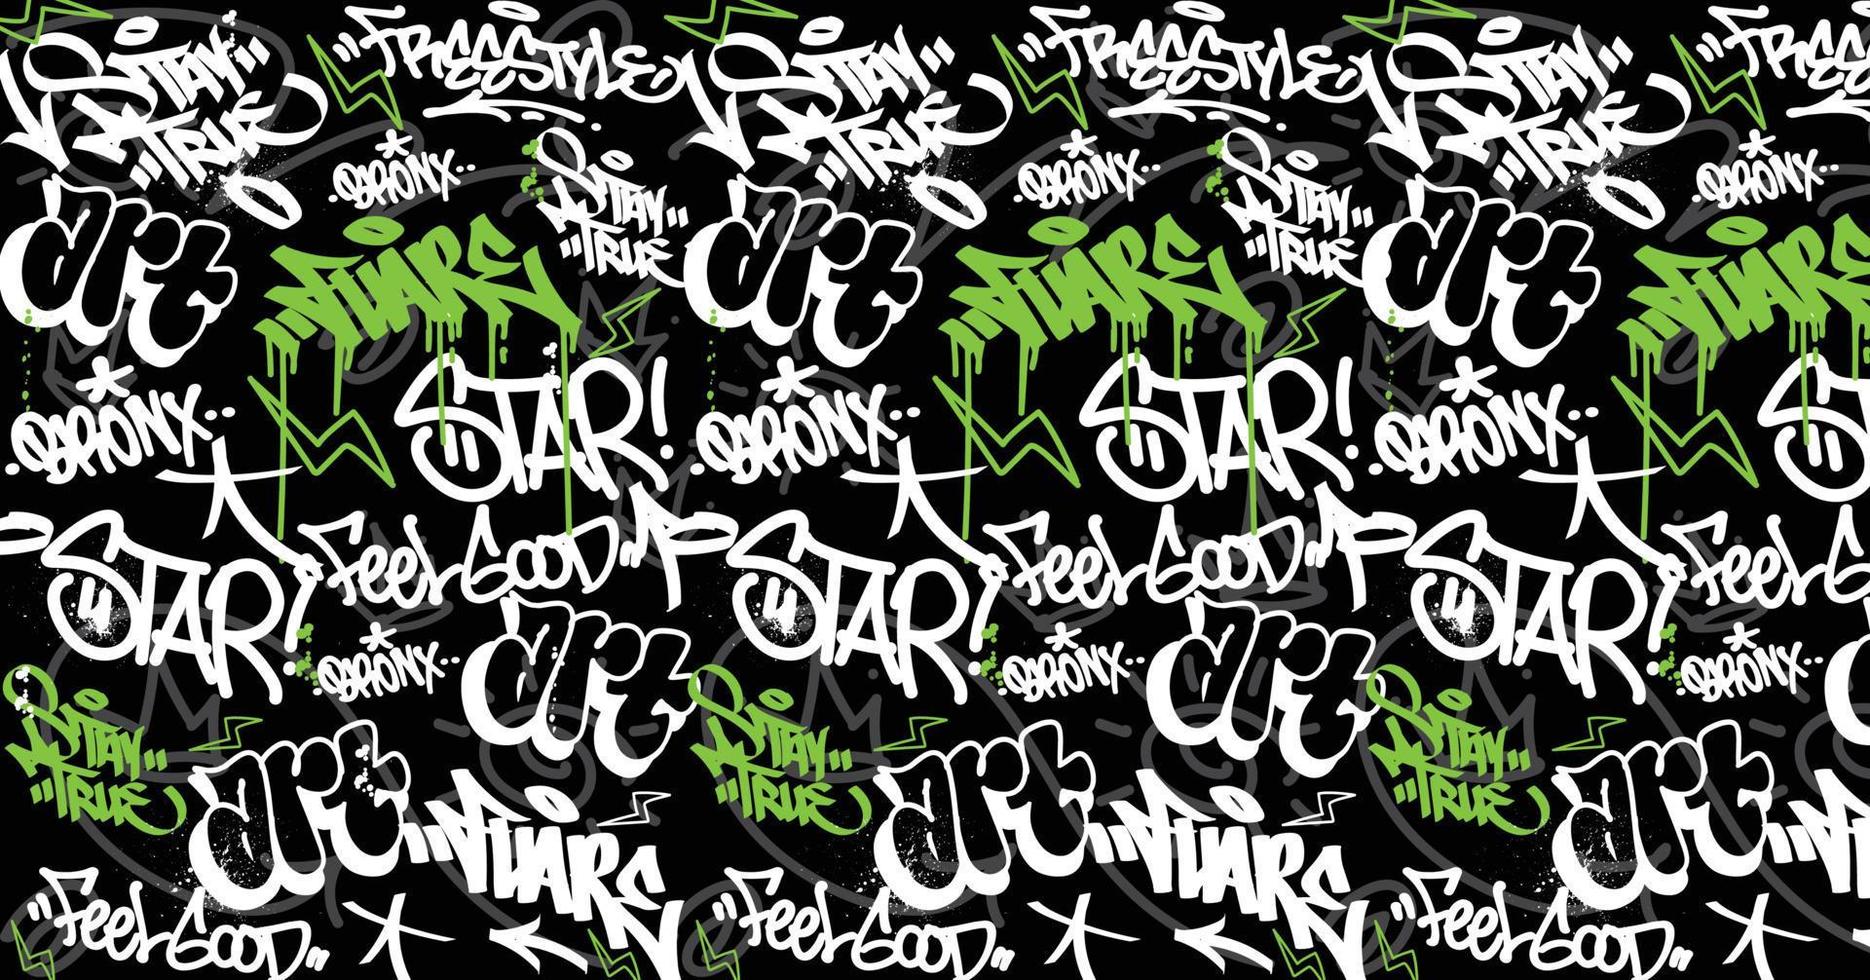 Graffiti art background with scribble throw-up and tagging hand-drawn style. Street art graffiti urban theme for prints, patterns, banners, and textiles in vector format